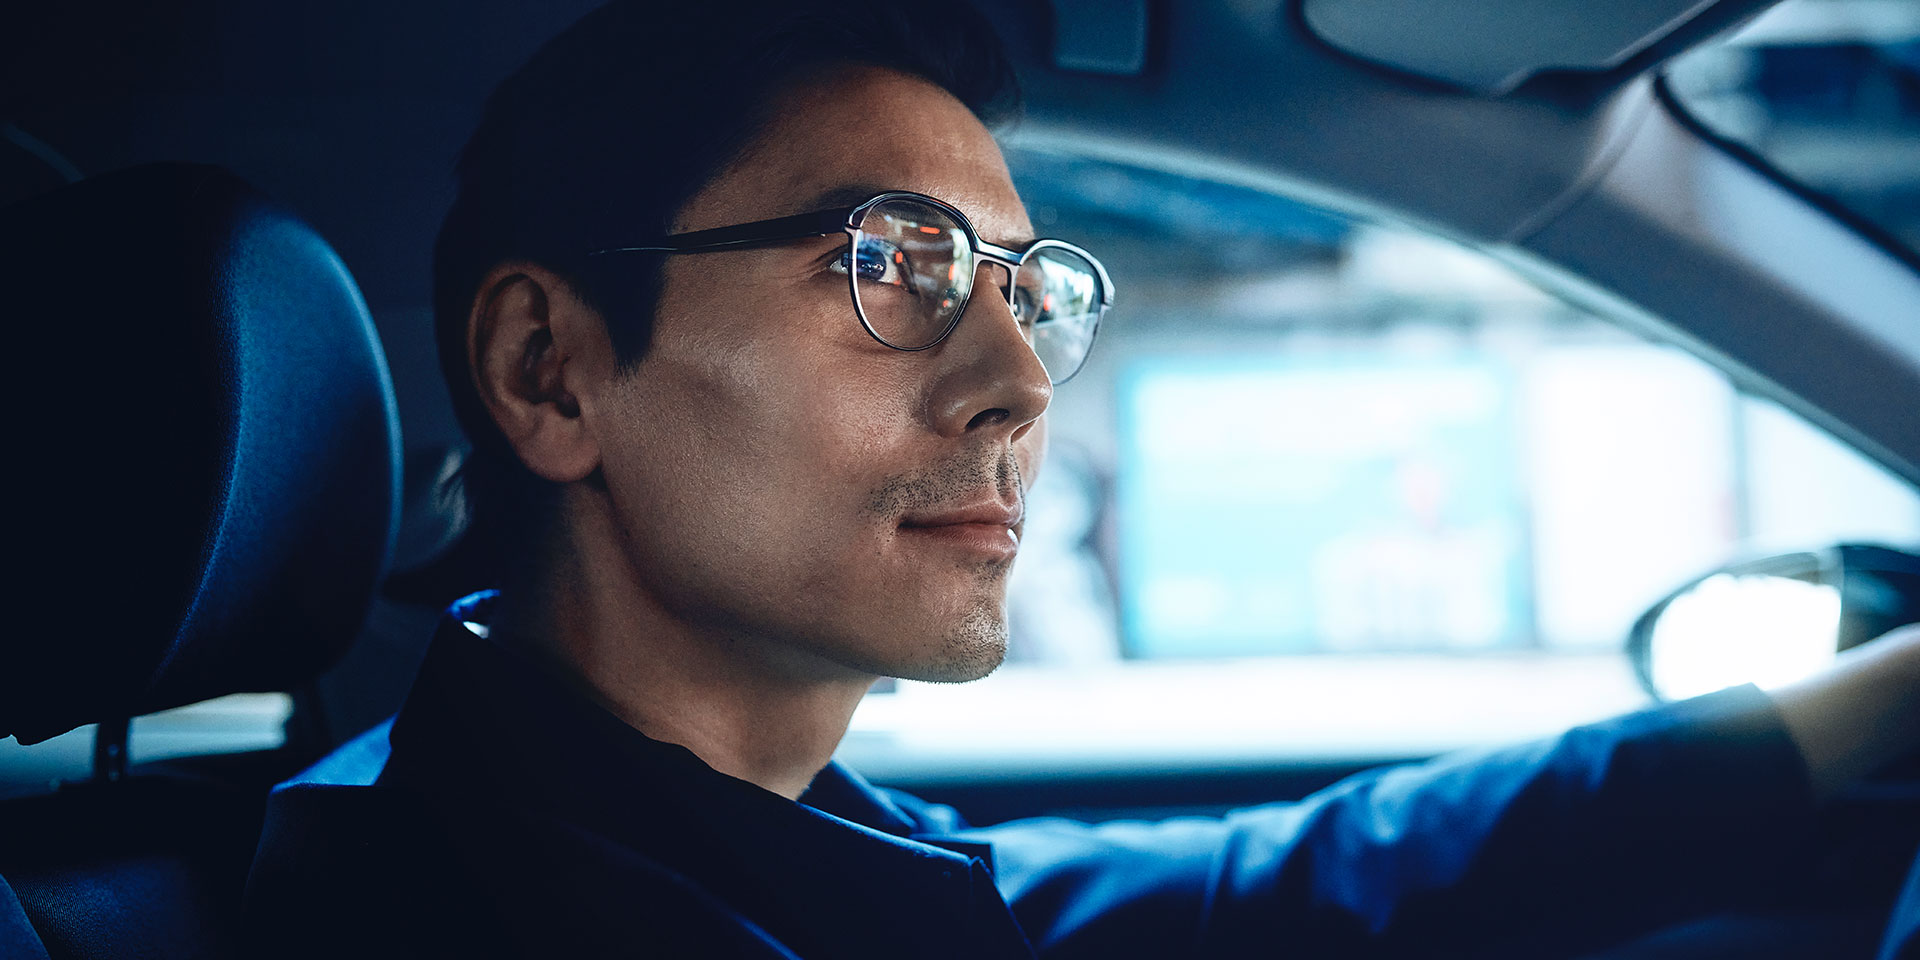 Man driving a car, looking self-confident with a slight smile on the road. He is wearing ZEISS Single Vision DriveSafe lenses.